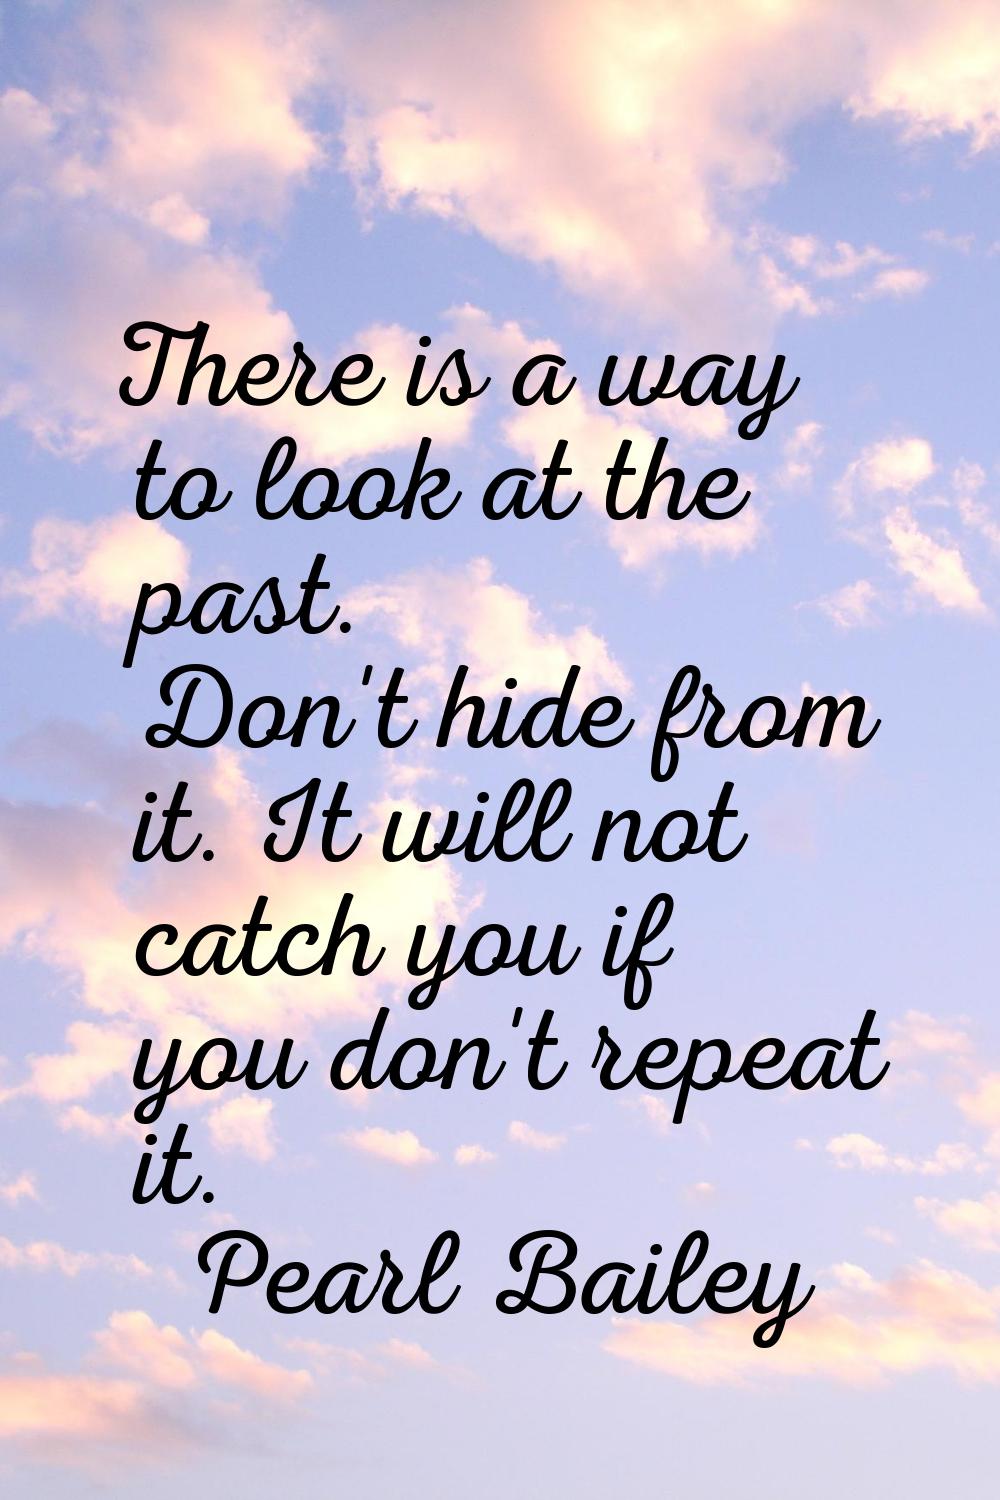 There is a way to look at the past. Don't hide from it. It will not catch you if you don't repeat i